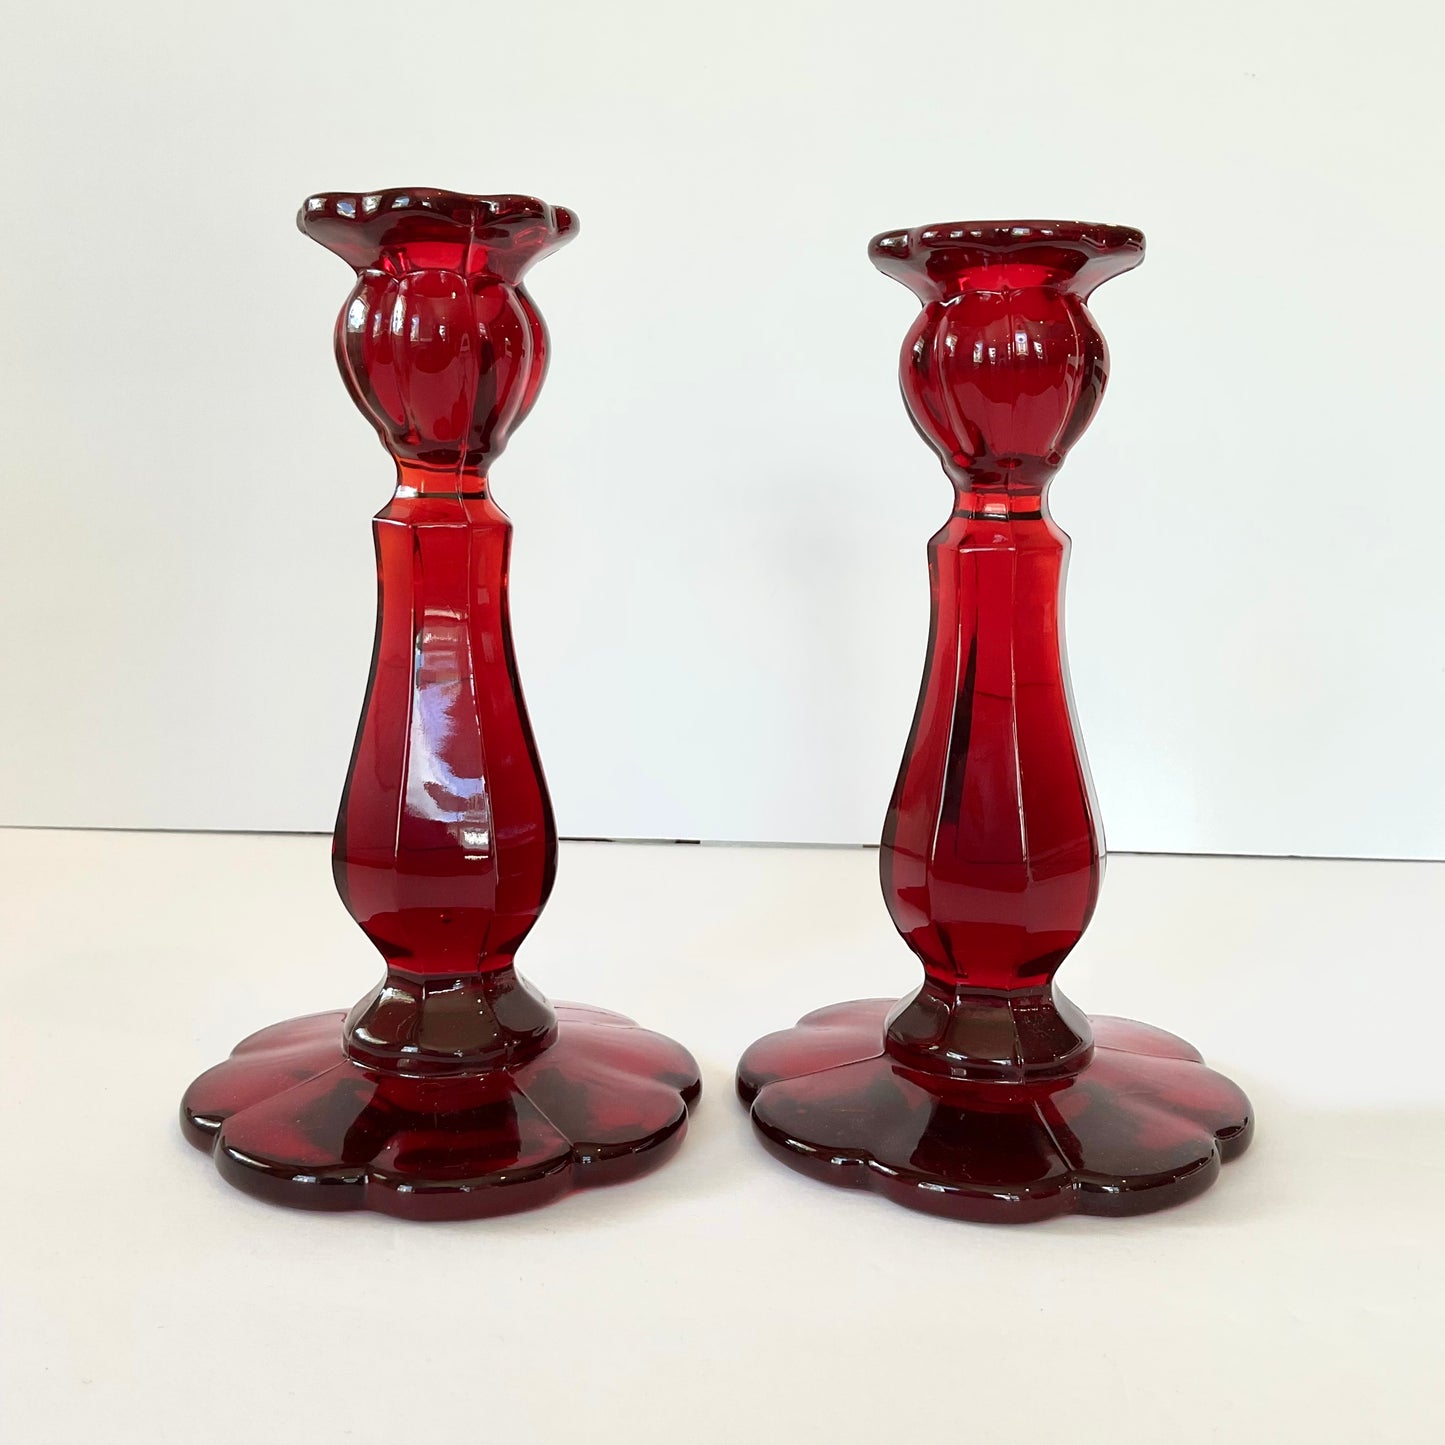 Pair of Mosser Glass 8" Candlesticks in Red